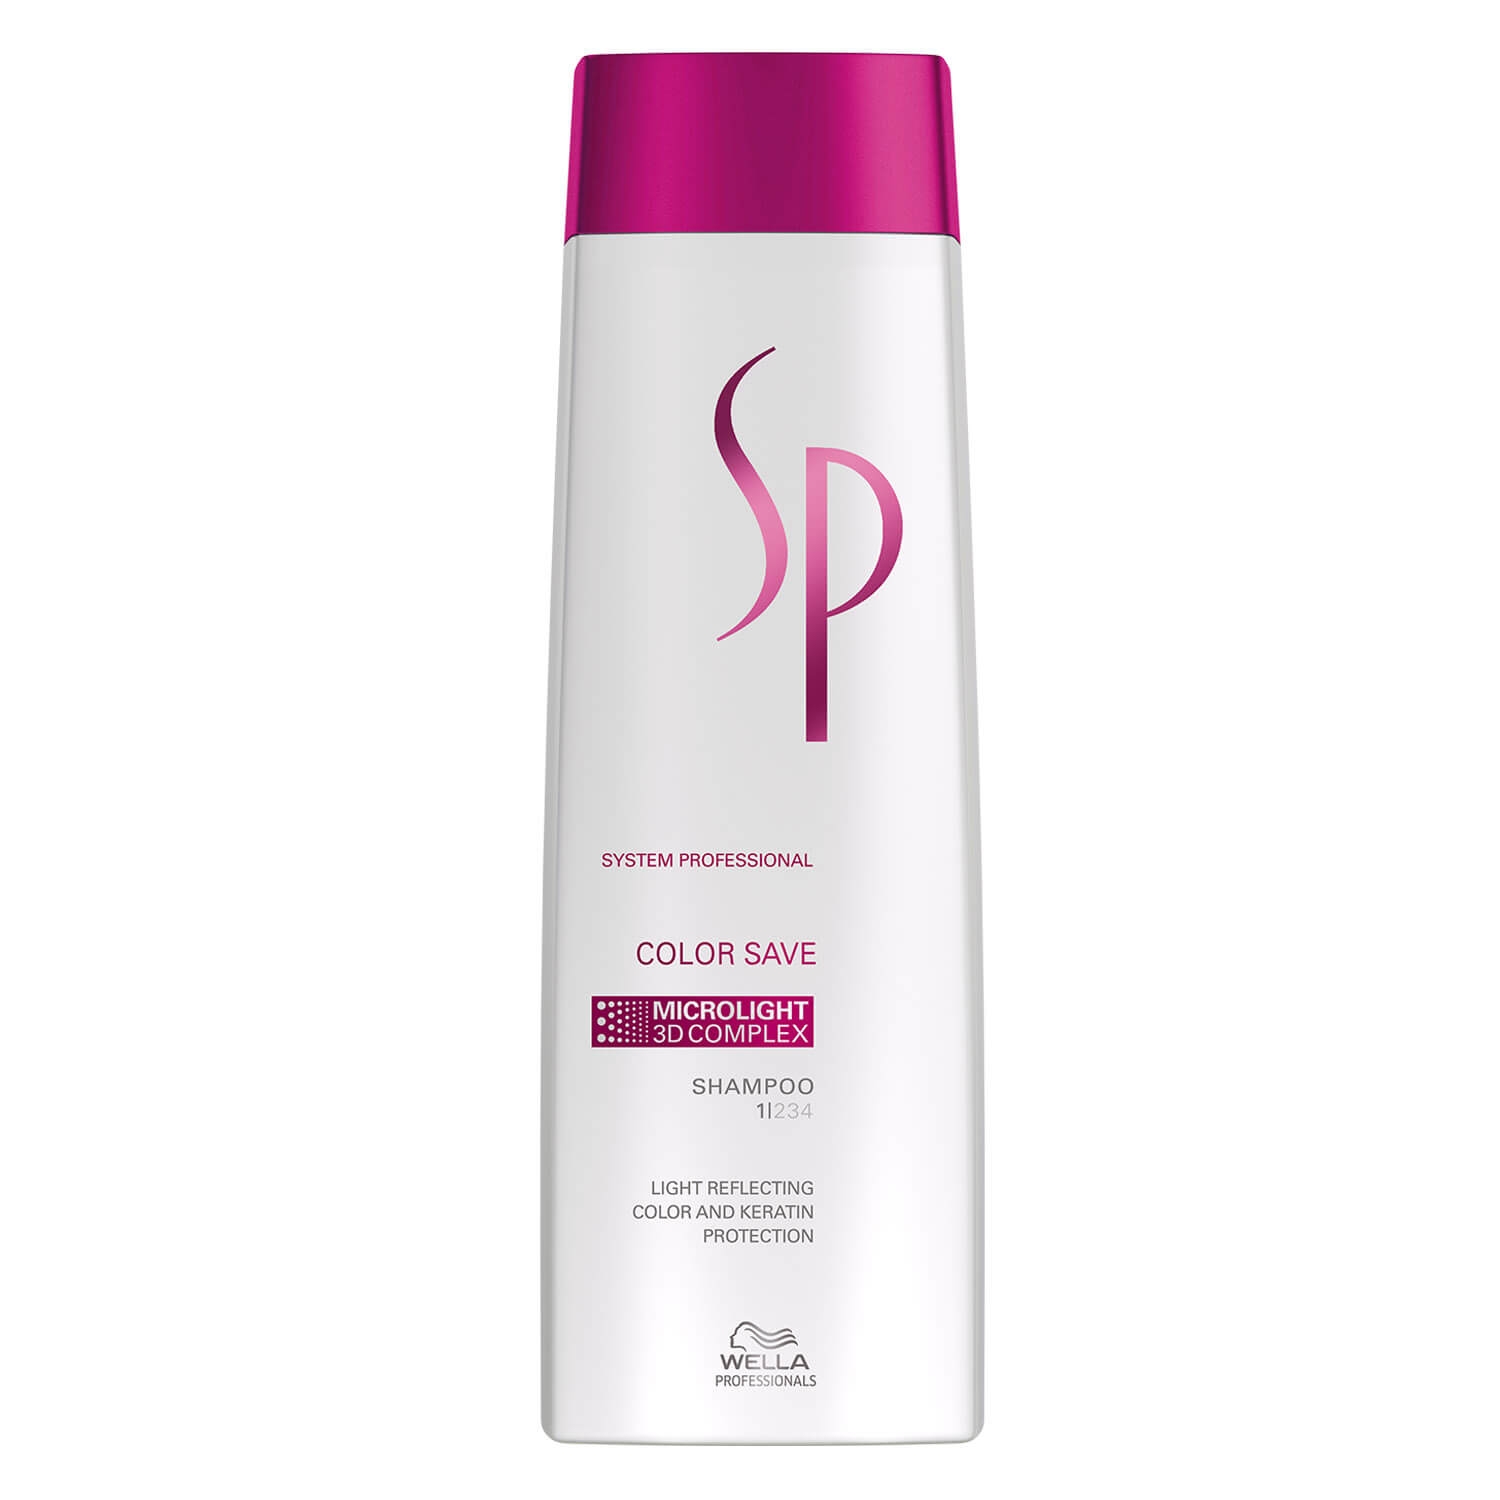 Product image from SP Color Save - Shampoo